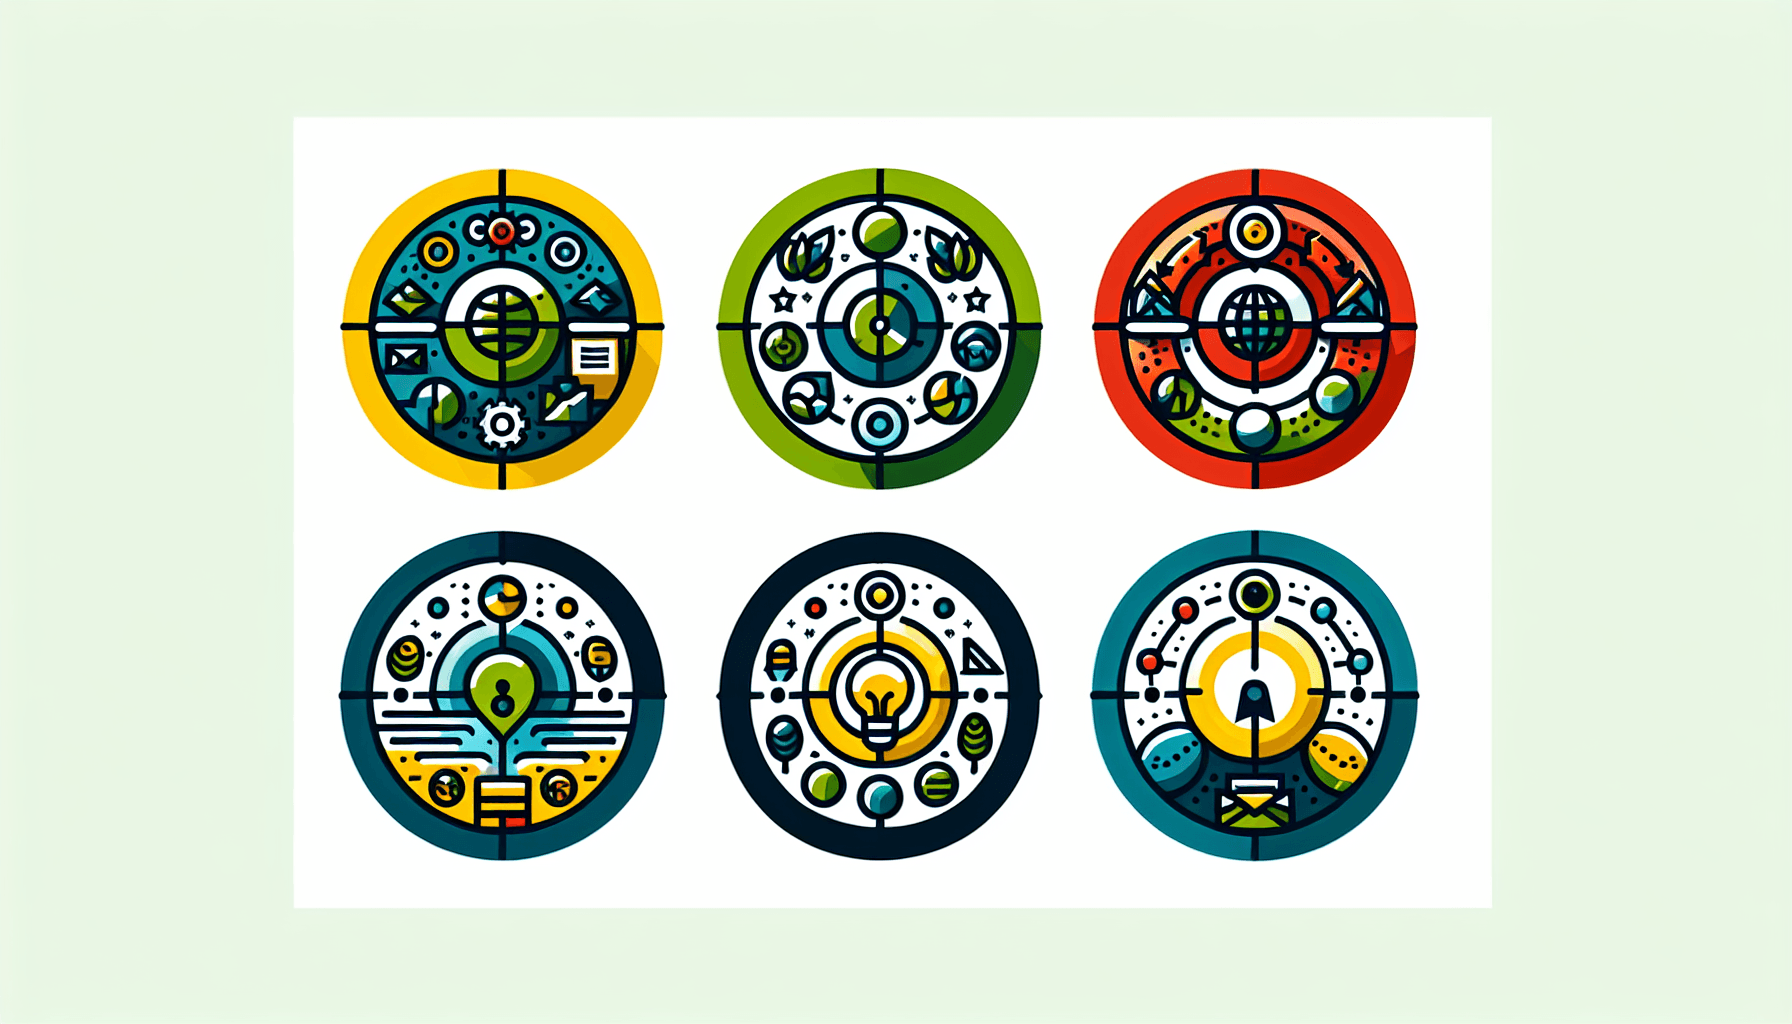 What are the 5 circular business models of Accenture? in flat illustration style and white background, red #f47574, green #88c7a8, yellow #fcc44b, and blue #645bc8 colors.